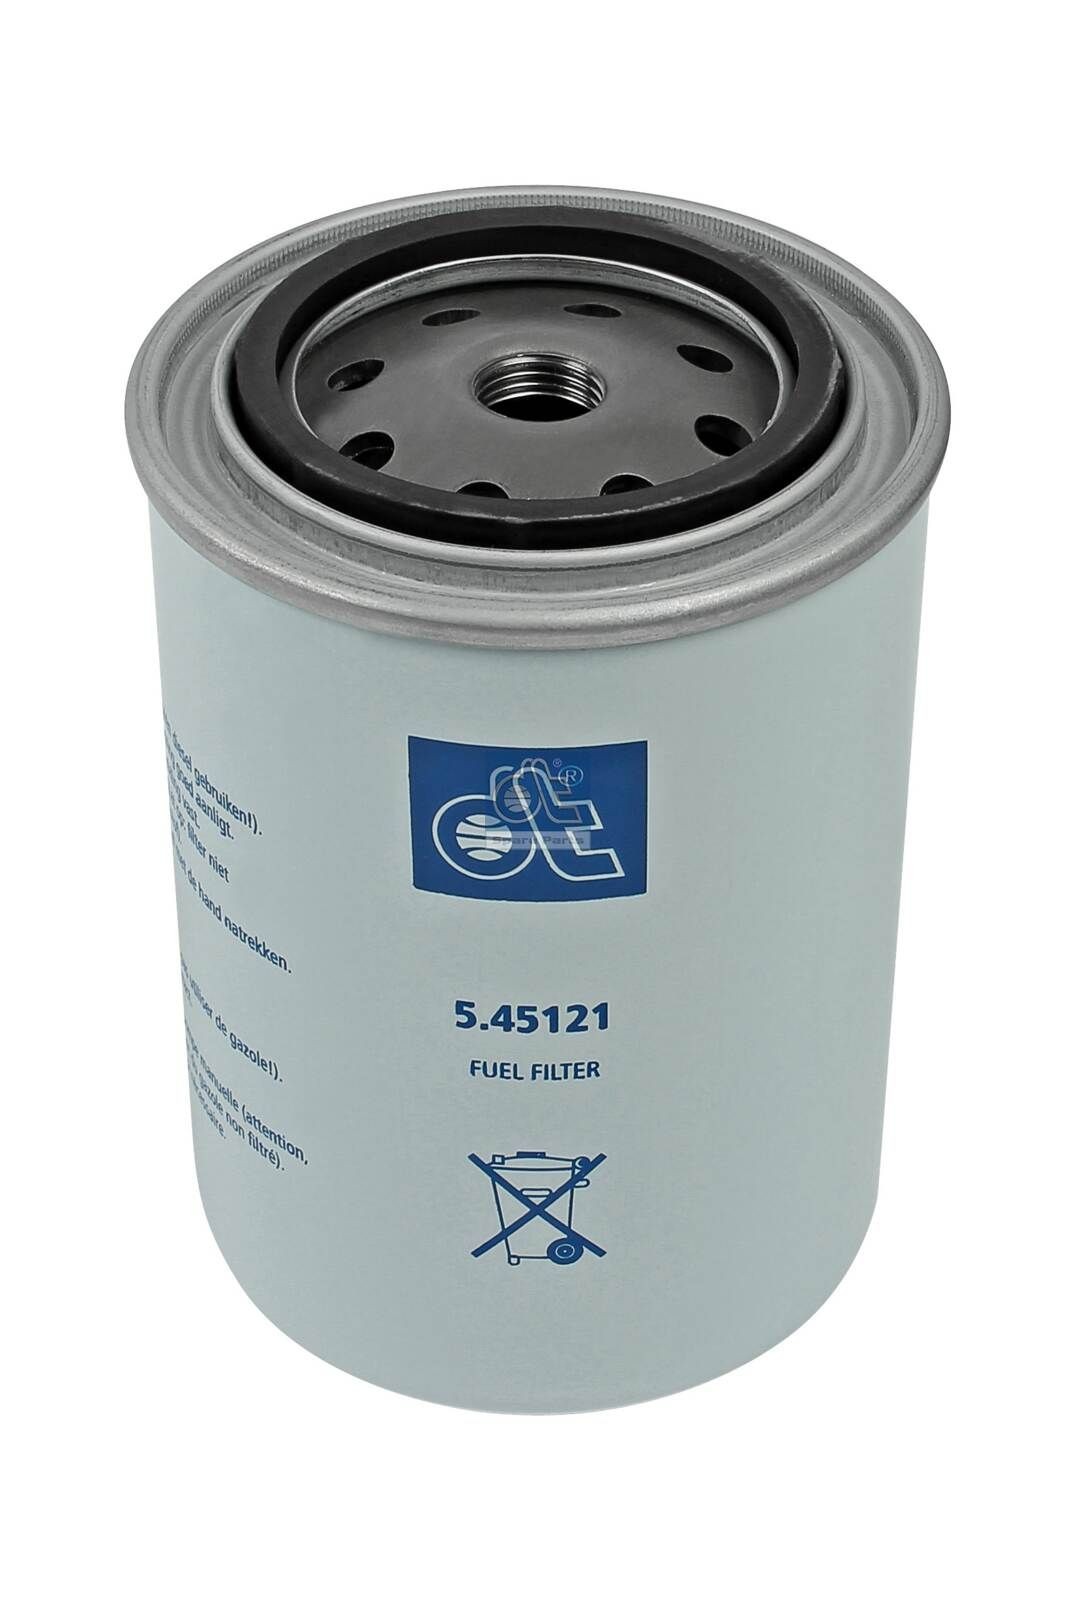 WDK 940/5 DT Spare Parts 5.45121 Oil filter 3630 31